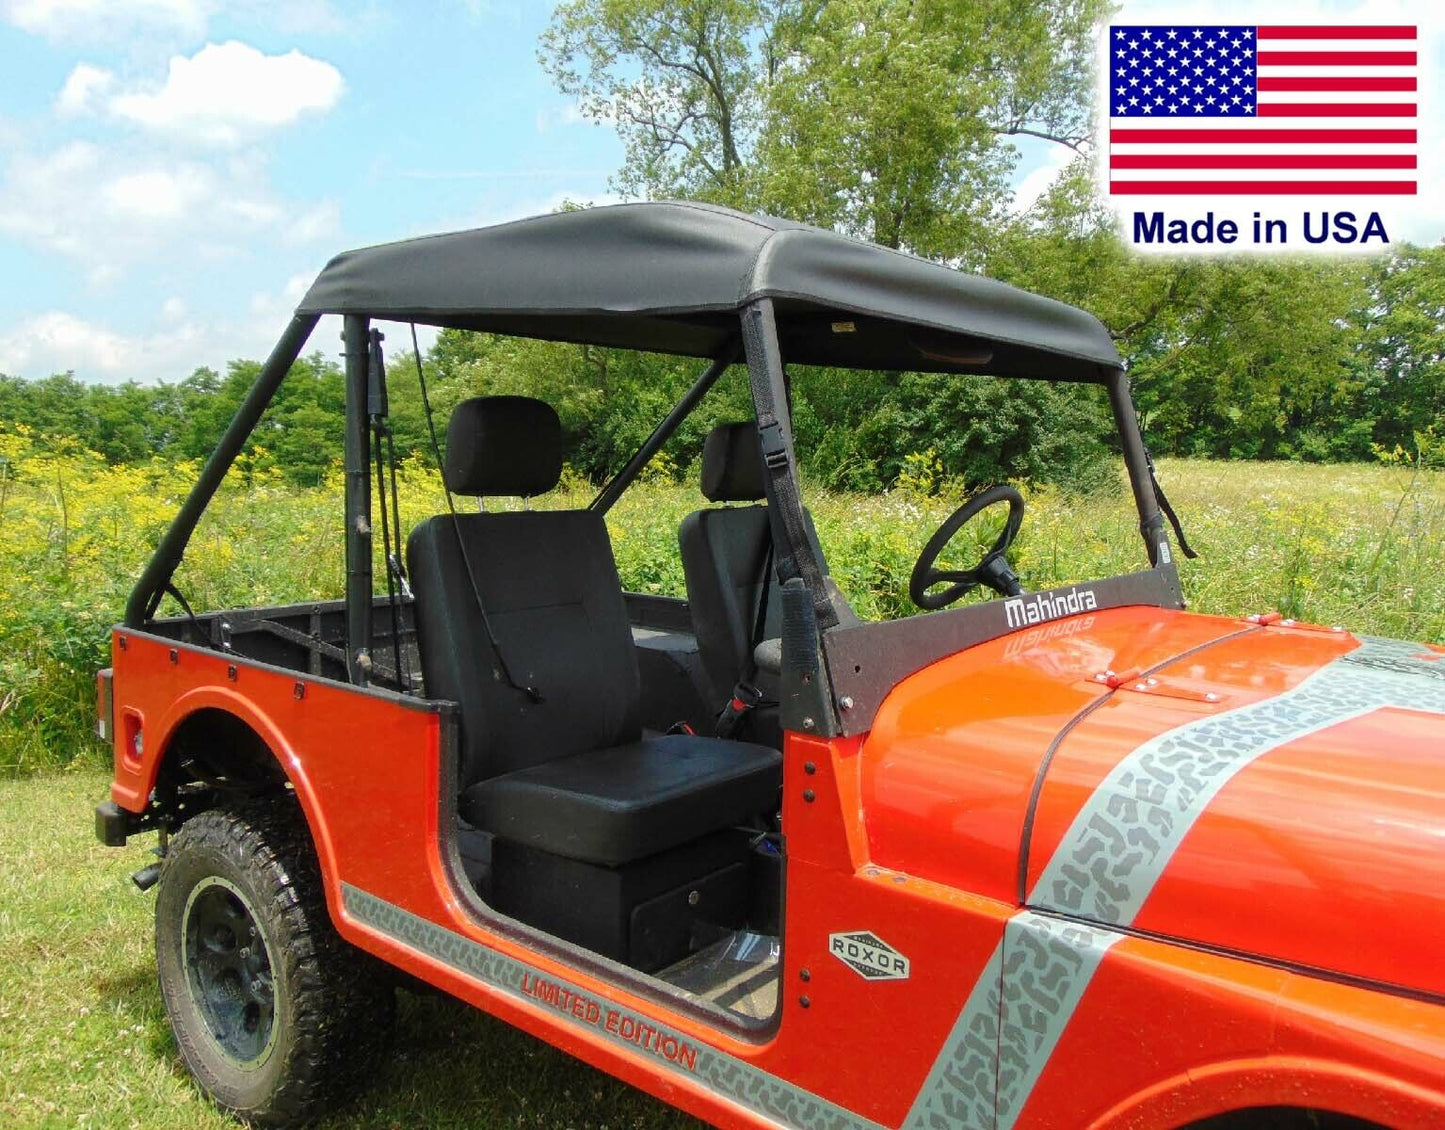 SOLID HARD Windshield & ROOF for Mahindra Roxor - Soft Top - Puncture Resistant